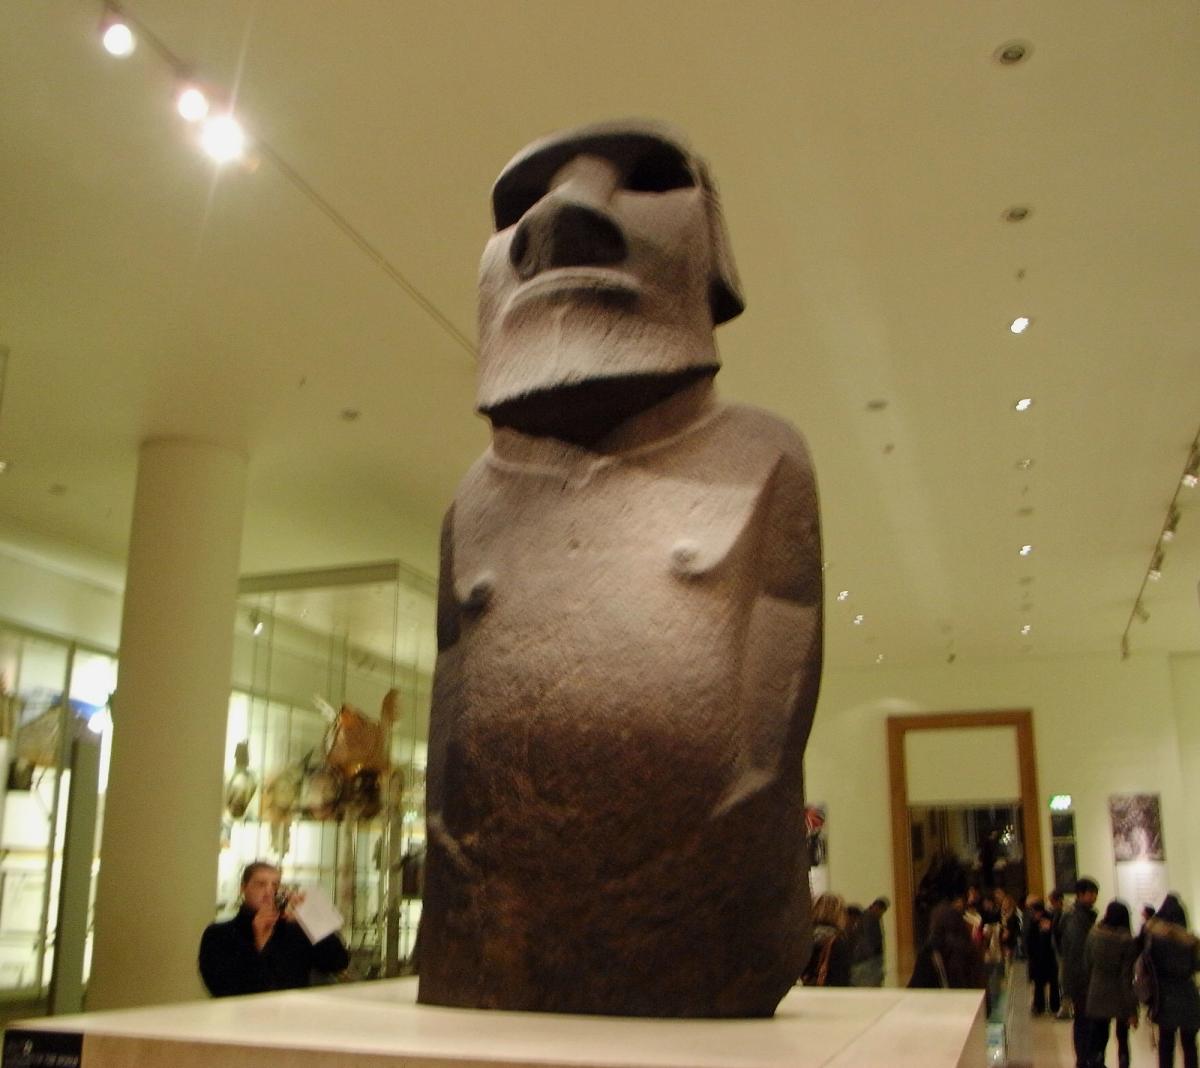 The moai statue at the British Museum 